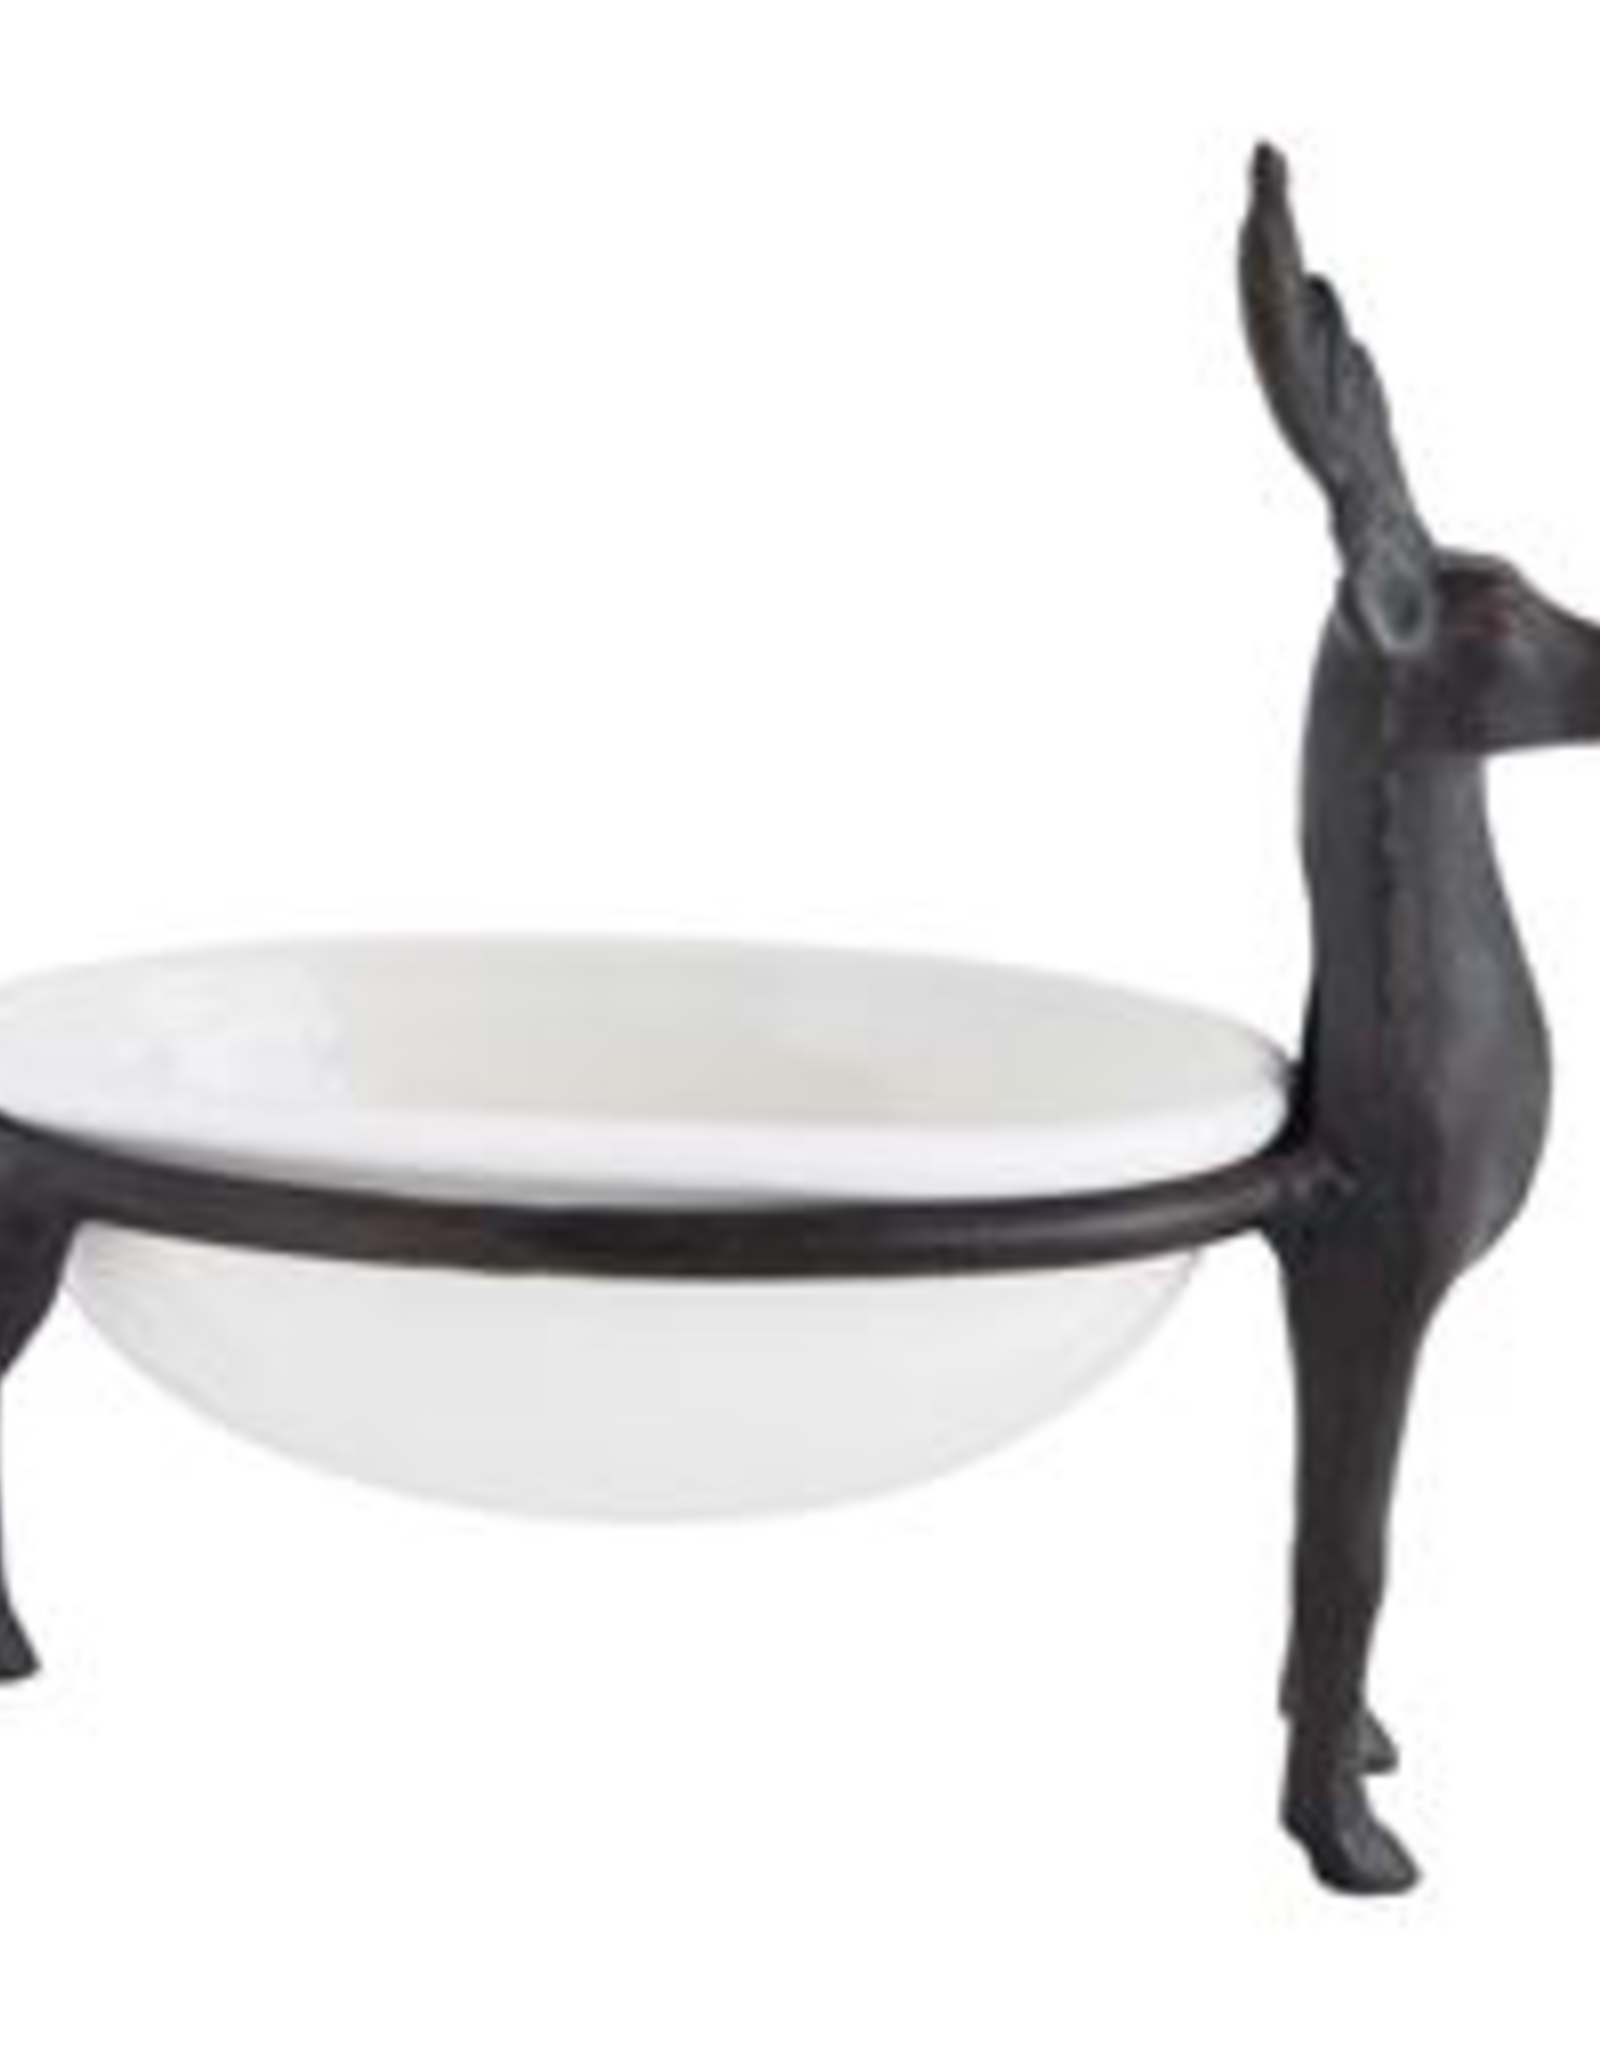 DISH-DEER HOLDING A CATCH ALL